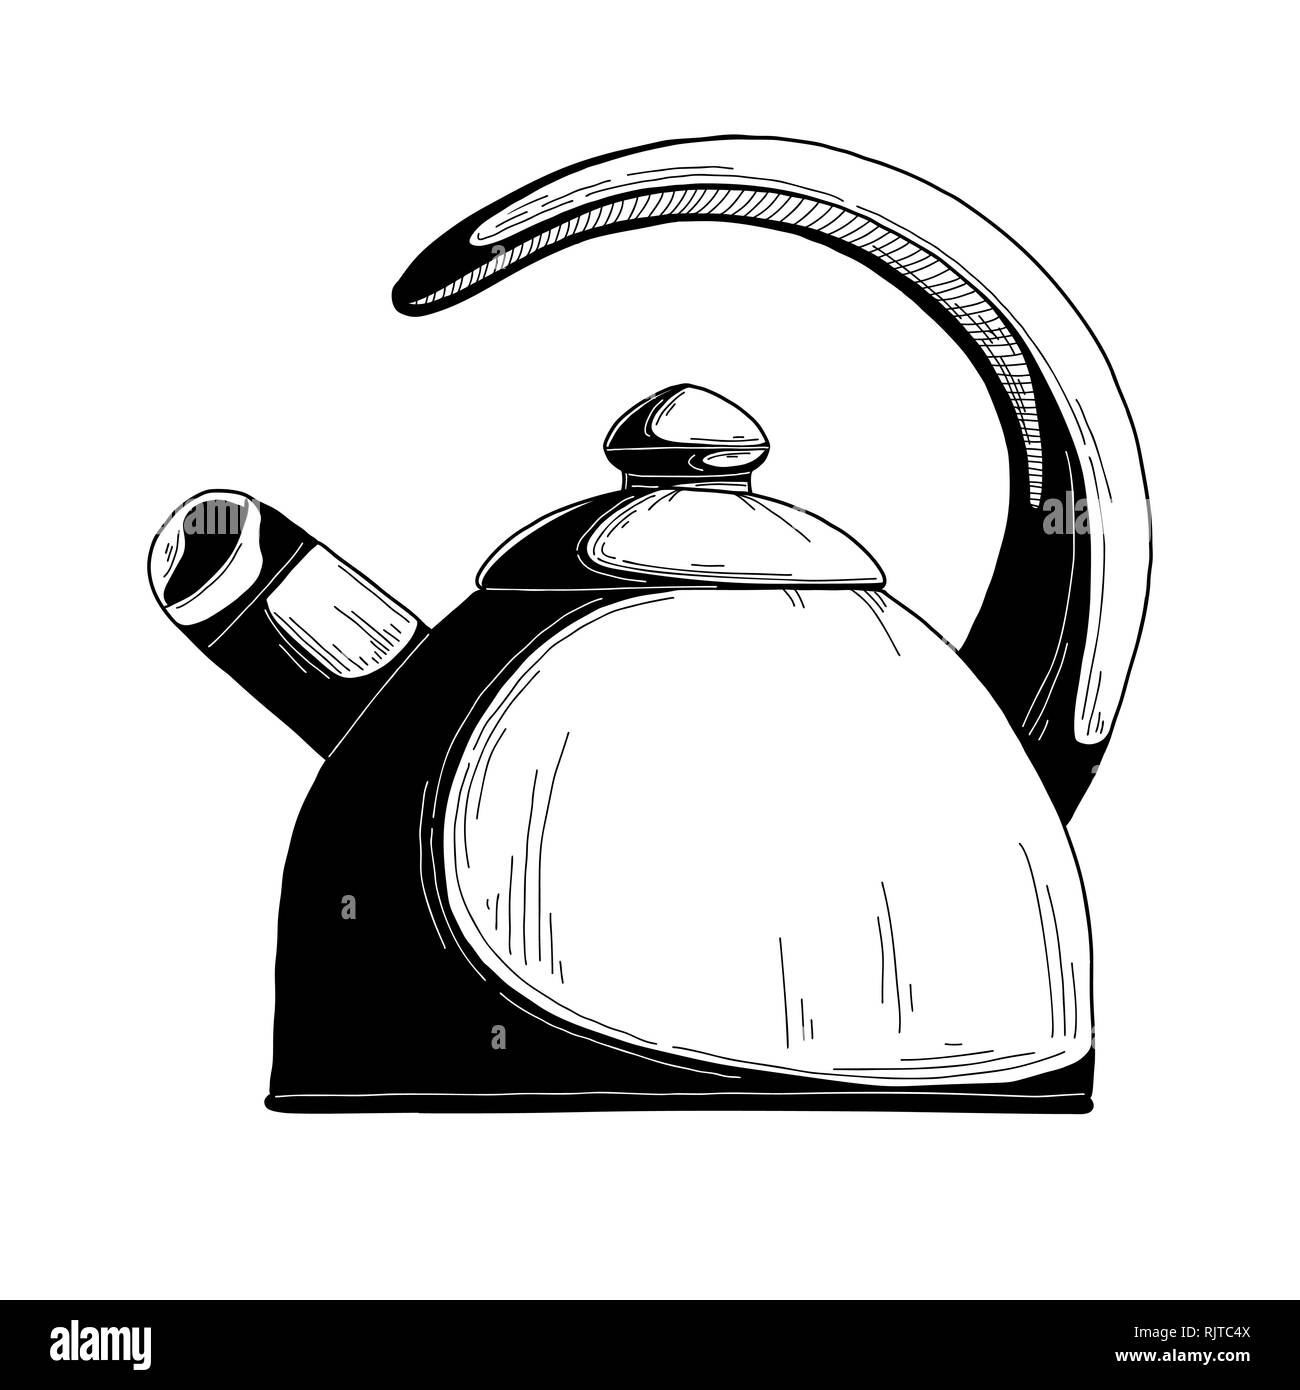 Realistic sketch of the kettle. Vector illustration Stock Vector